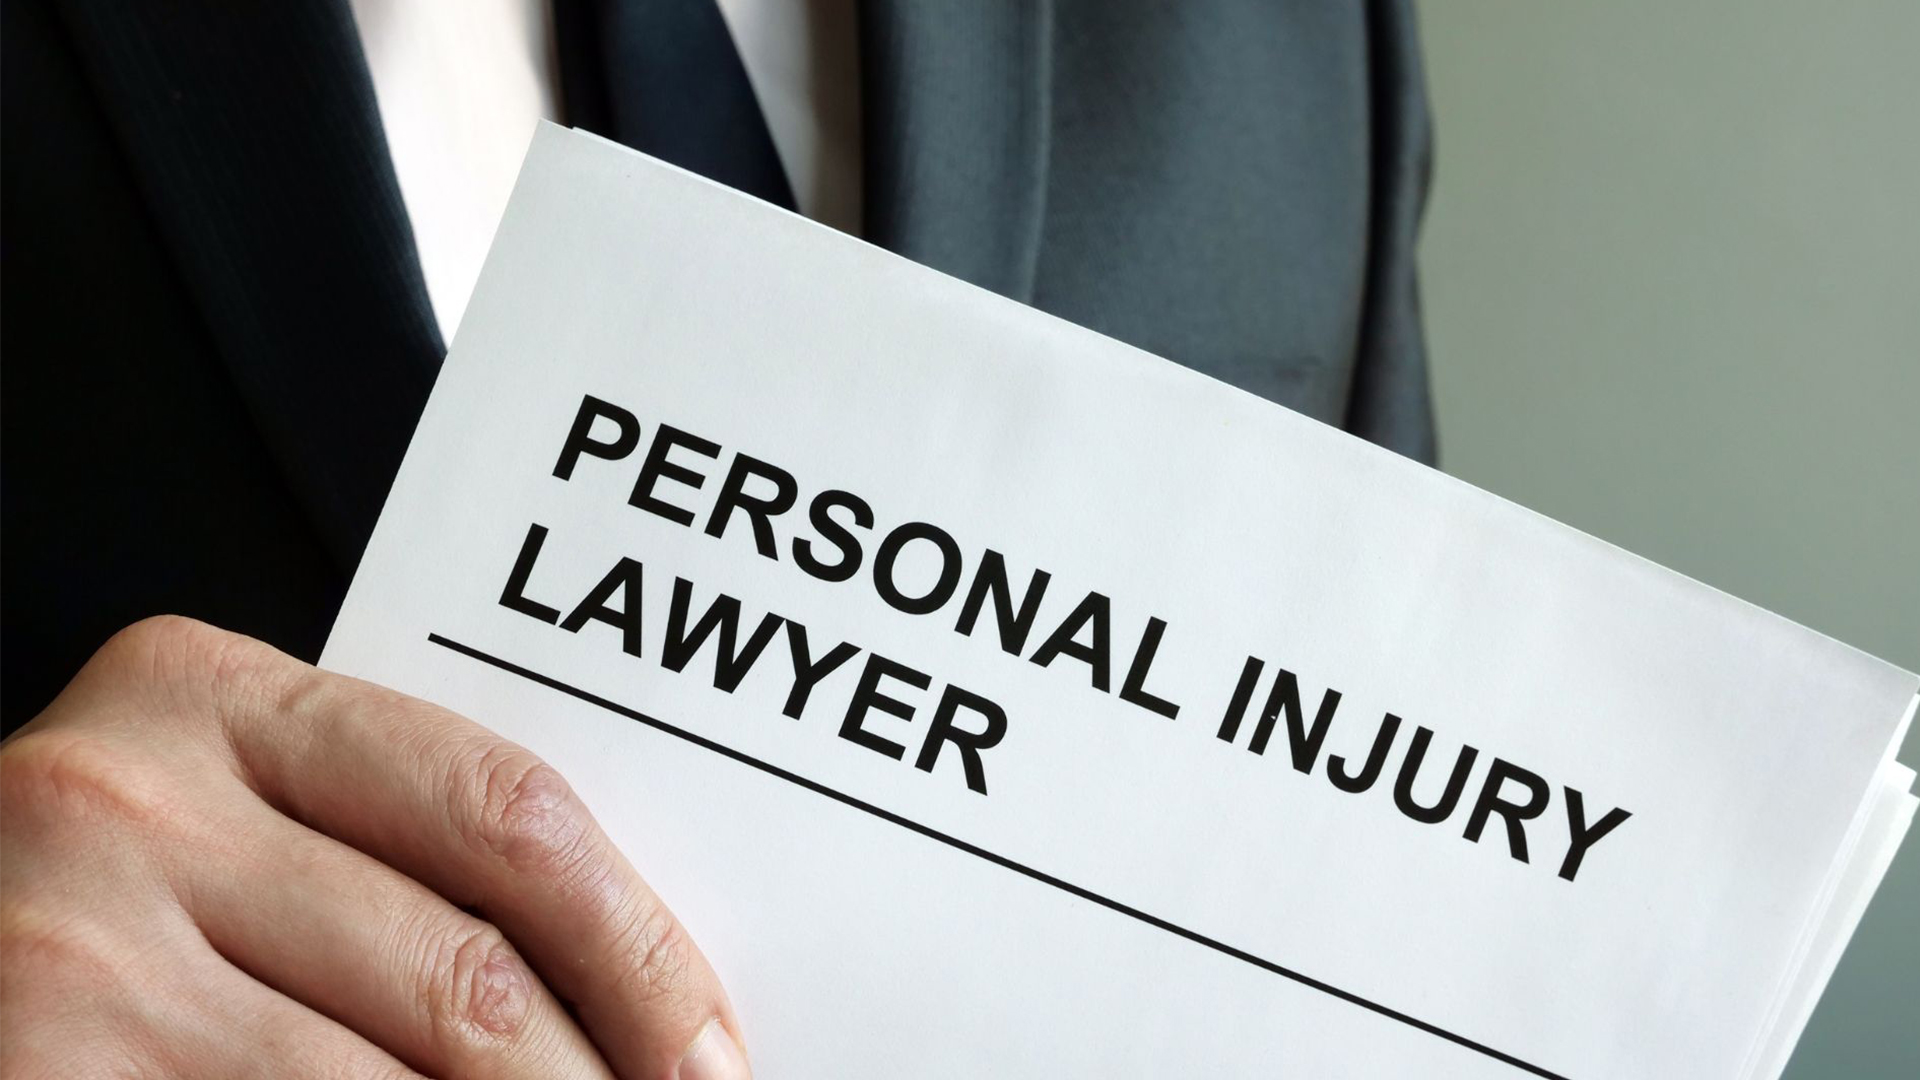 The Complete Guide to Personal Injury Cases